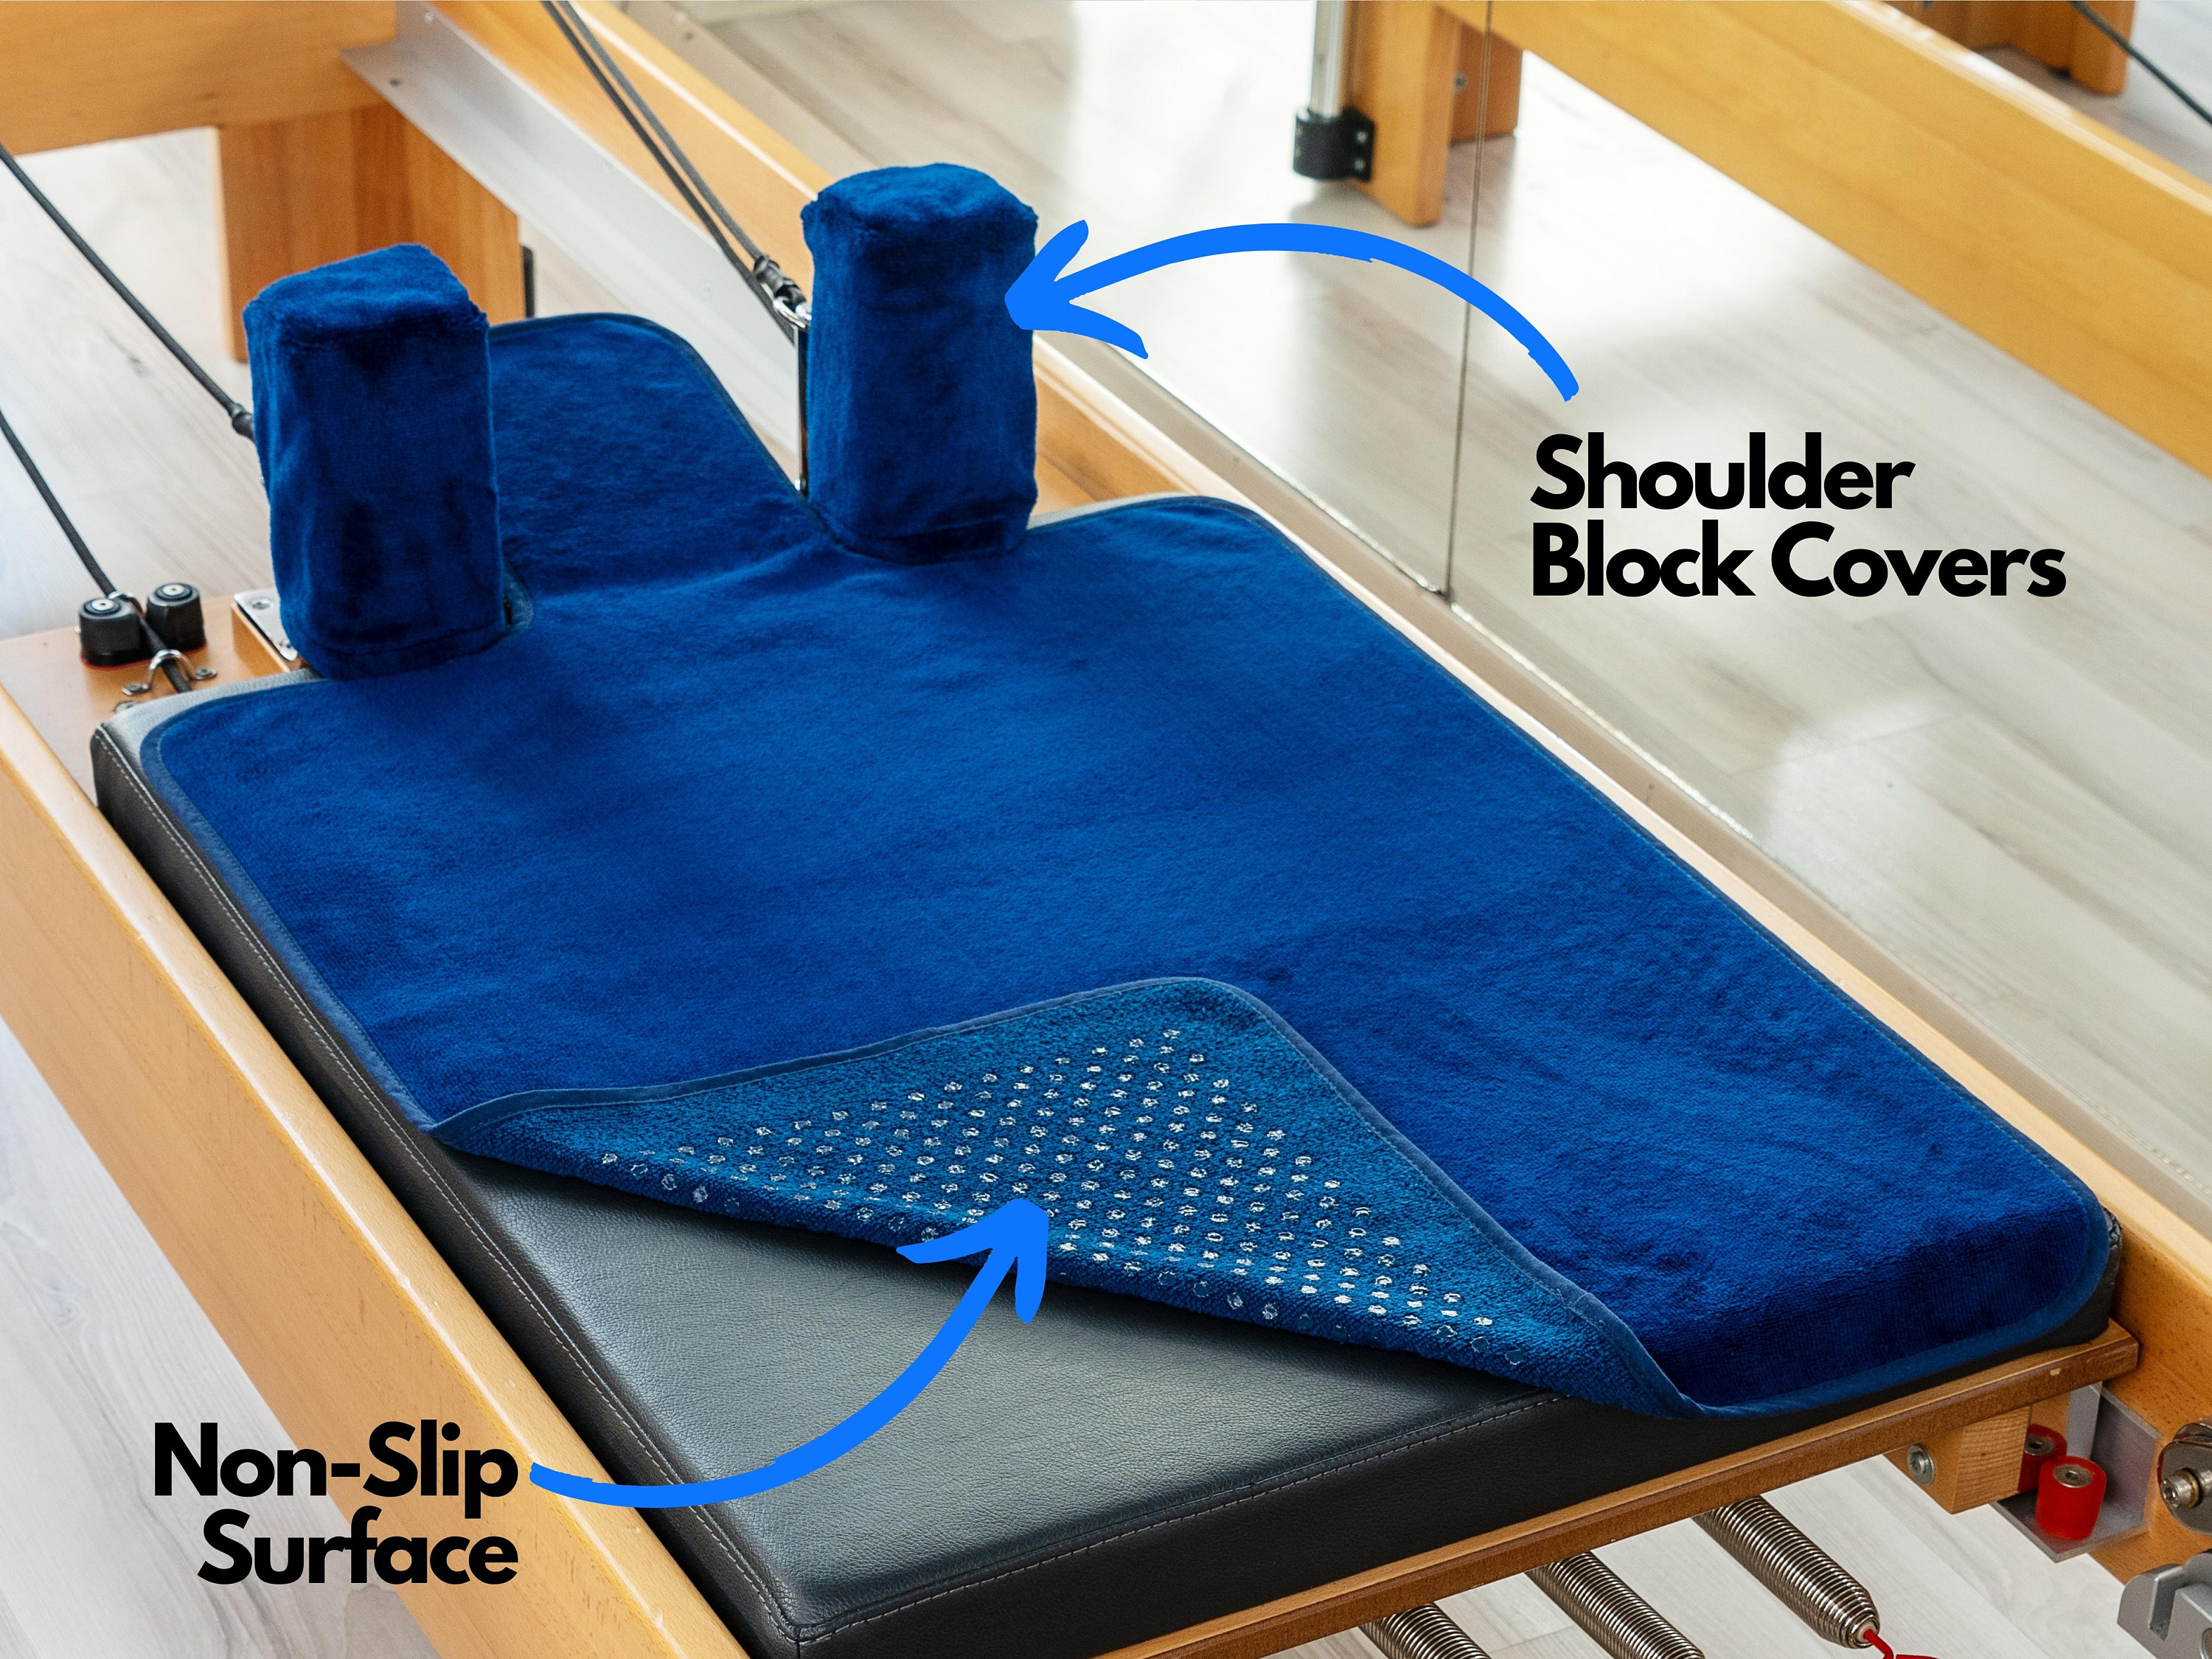 Pilates Reformer Towel Non-slip Surface Navy Blue, Pilates Accessories,  Gift for Birthday, Personalized Gifts 